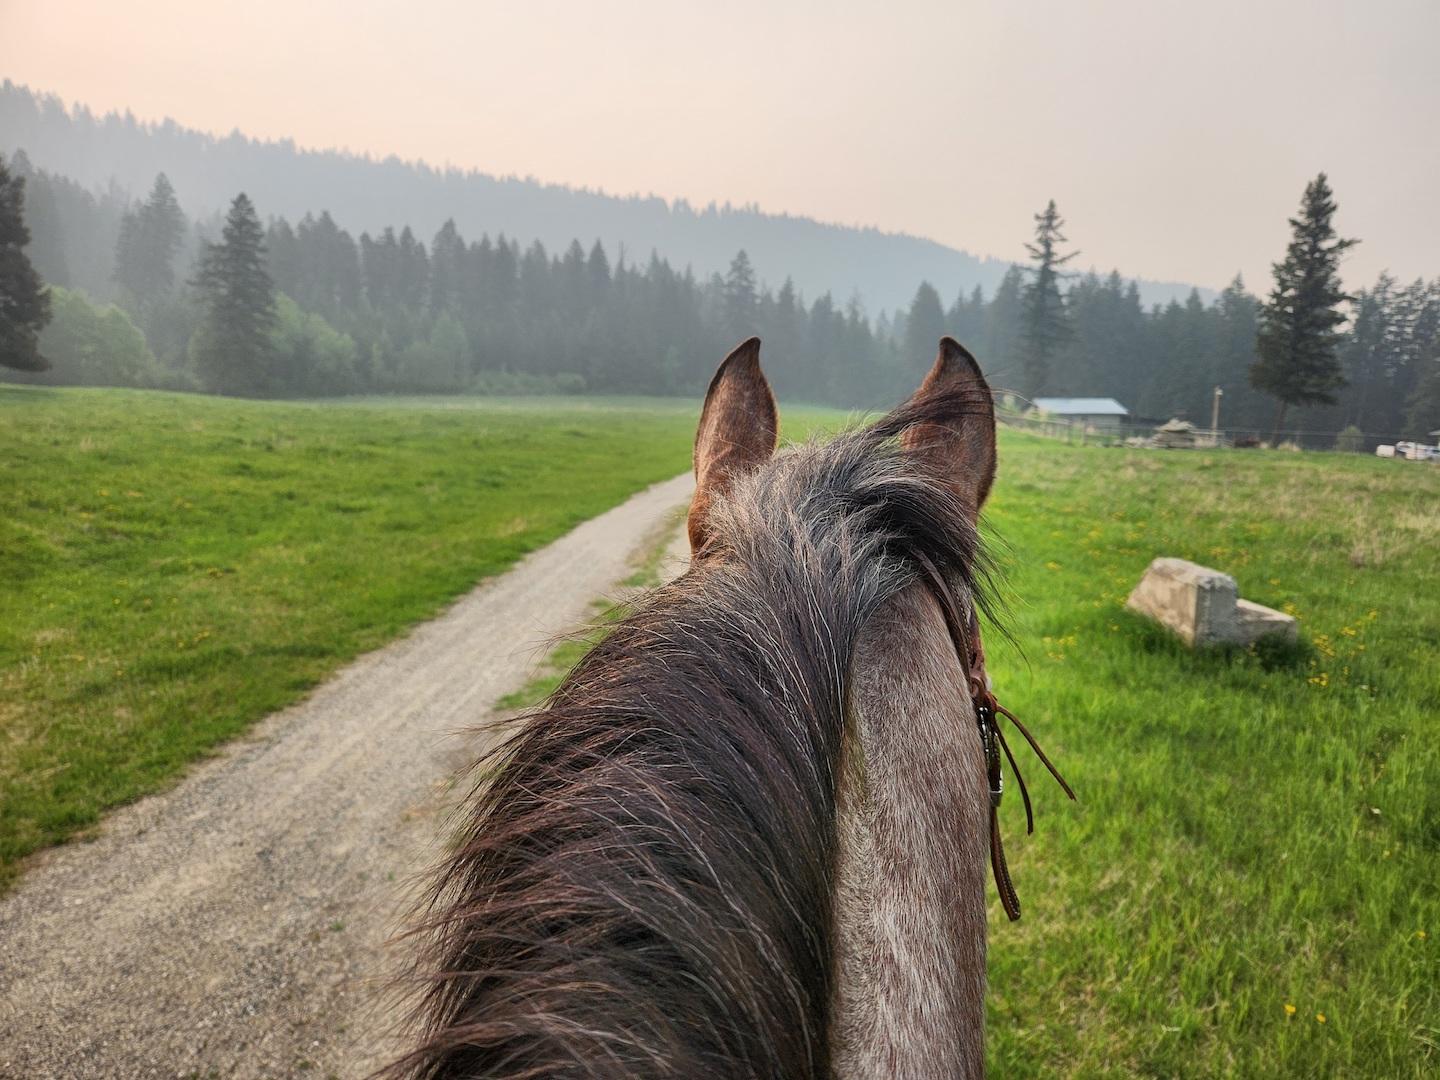 photo of a green field under a smoky sky, seen beyond the head and ears of an appaloosa horse